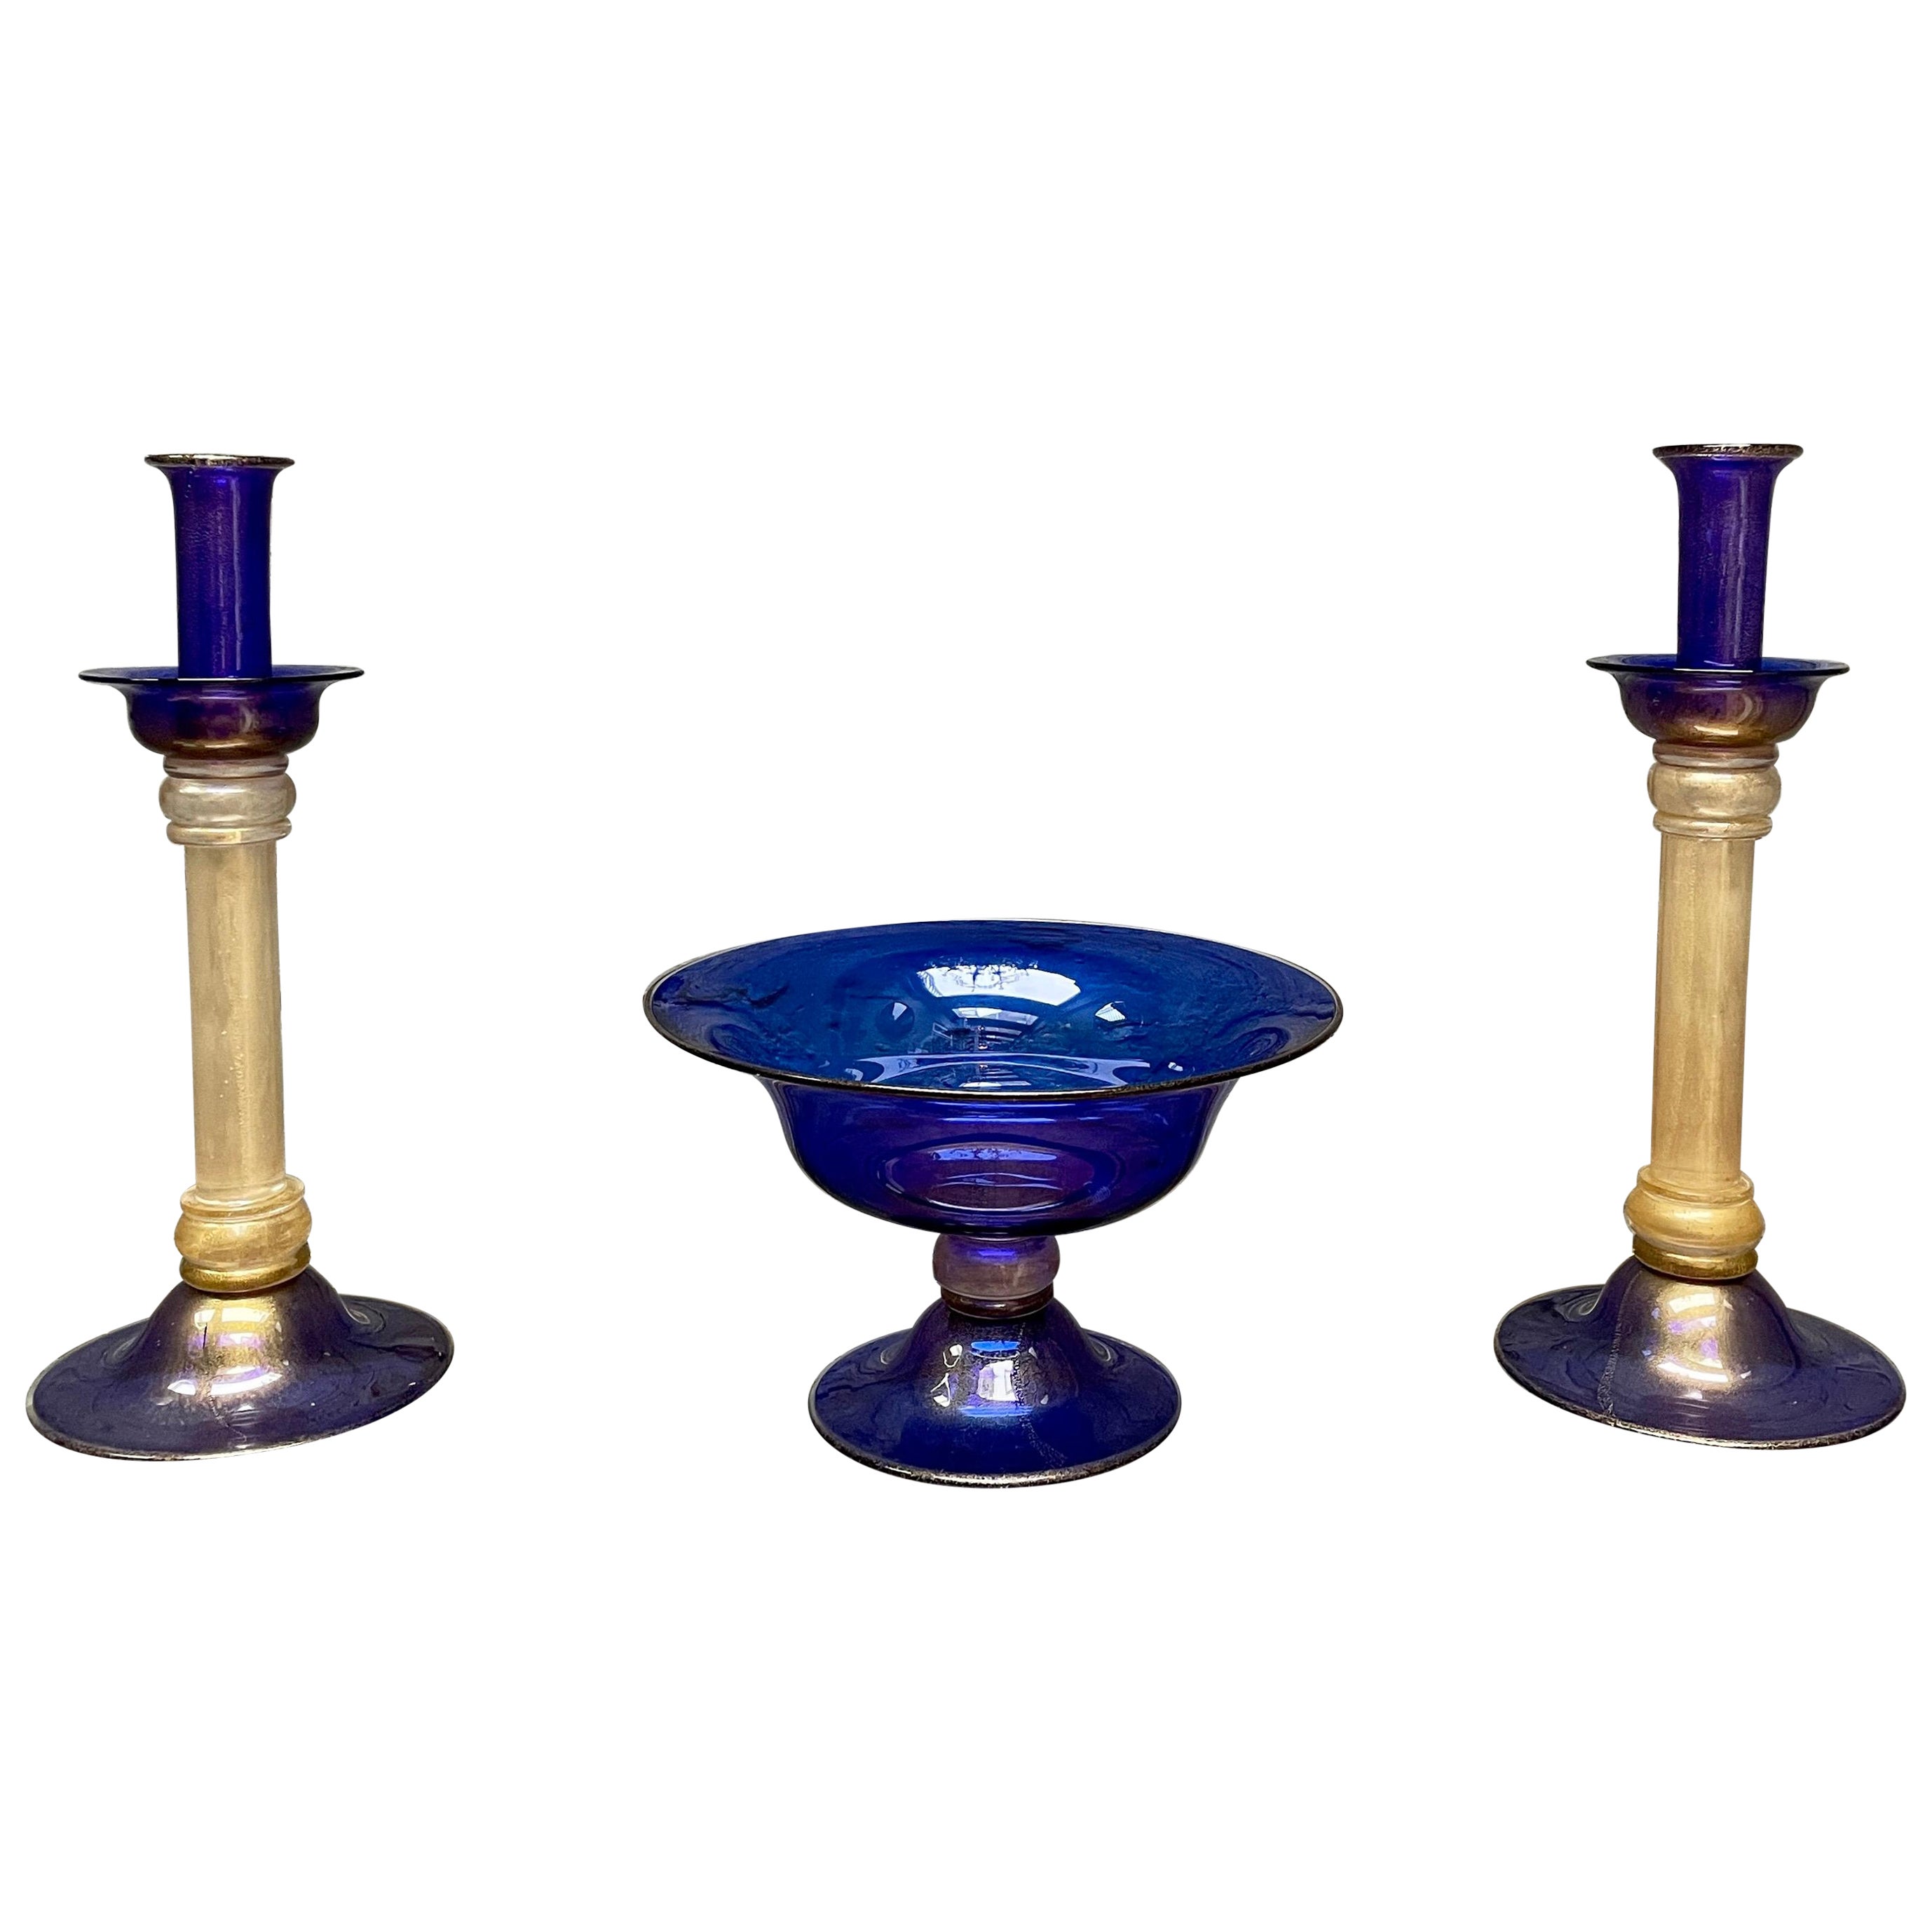 Pair of Murano Glass Candlesticks and Tazza